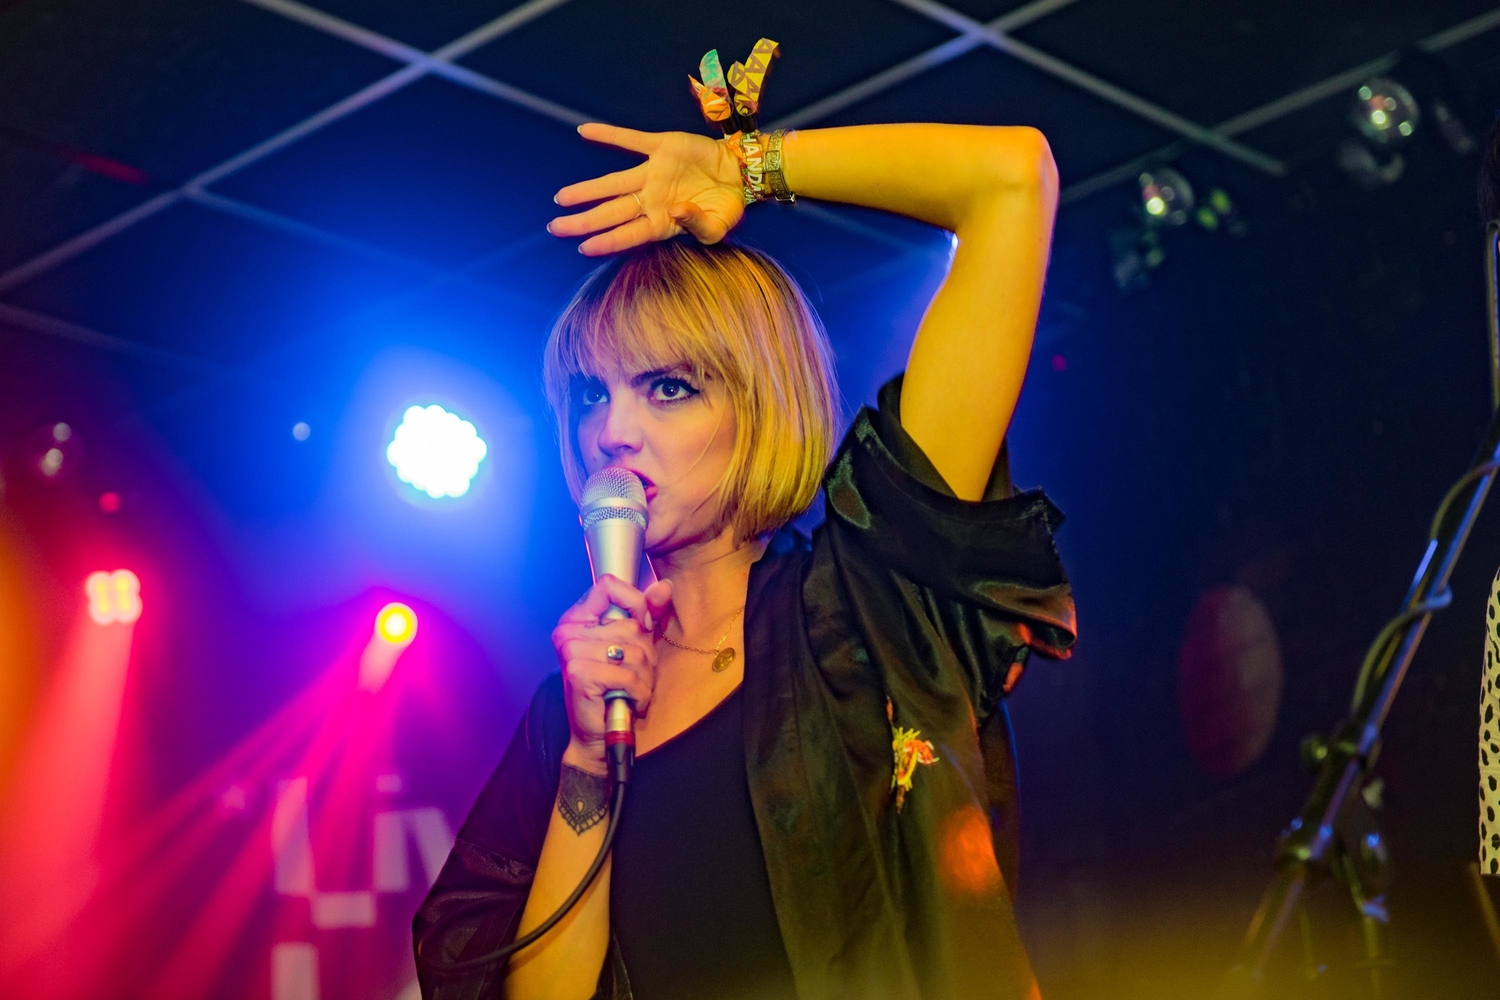 “We’re giving it everything we’ve got” - Anteros gear up for House of Vans at Bestival 2018